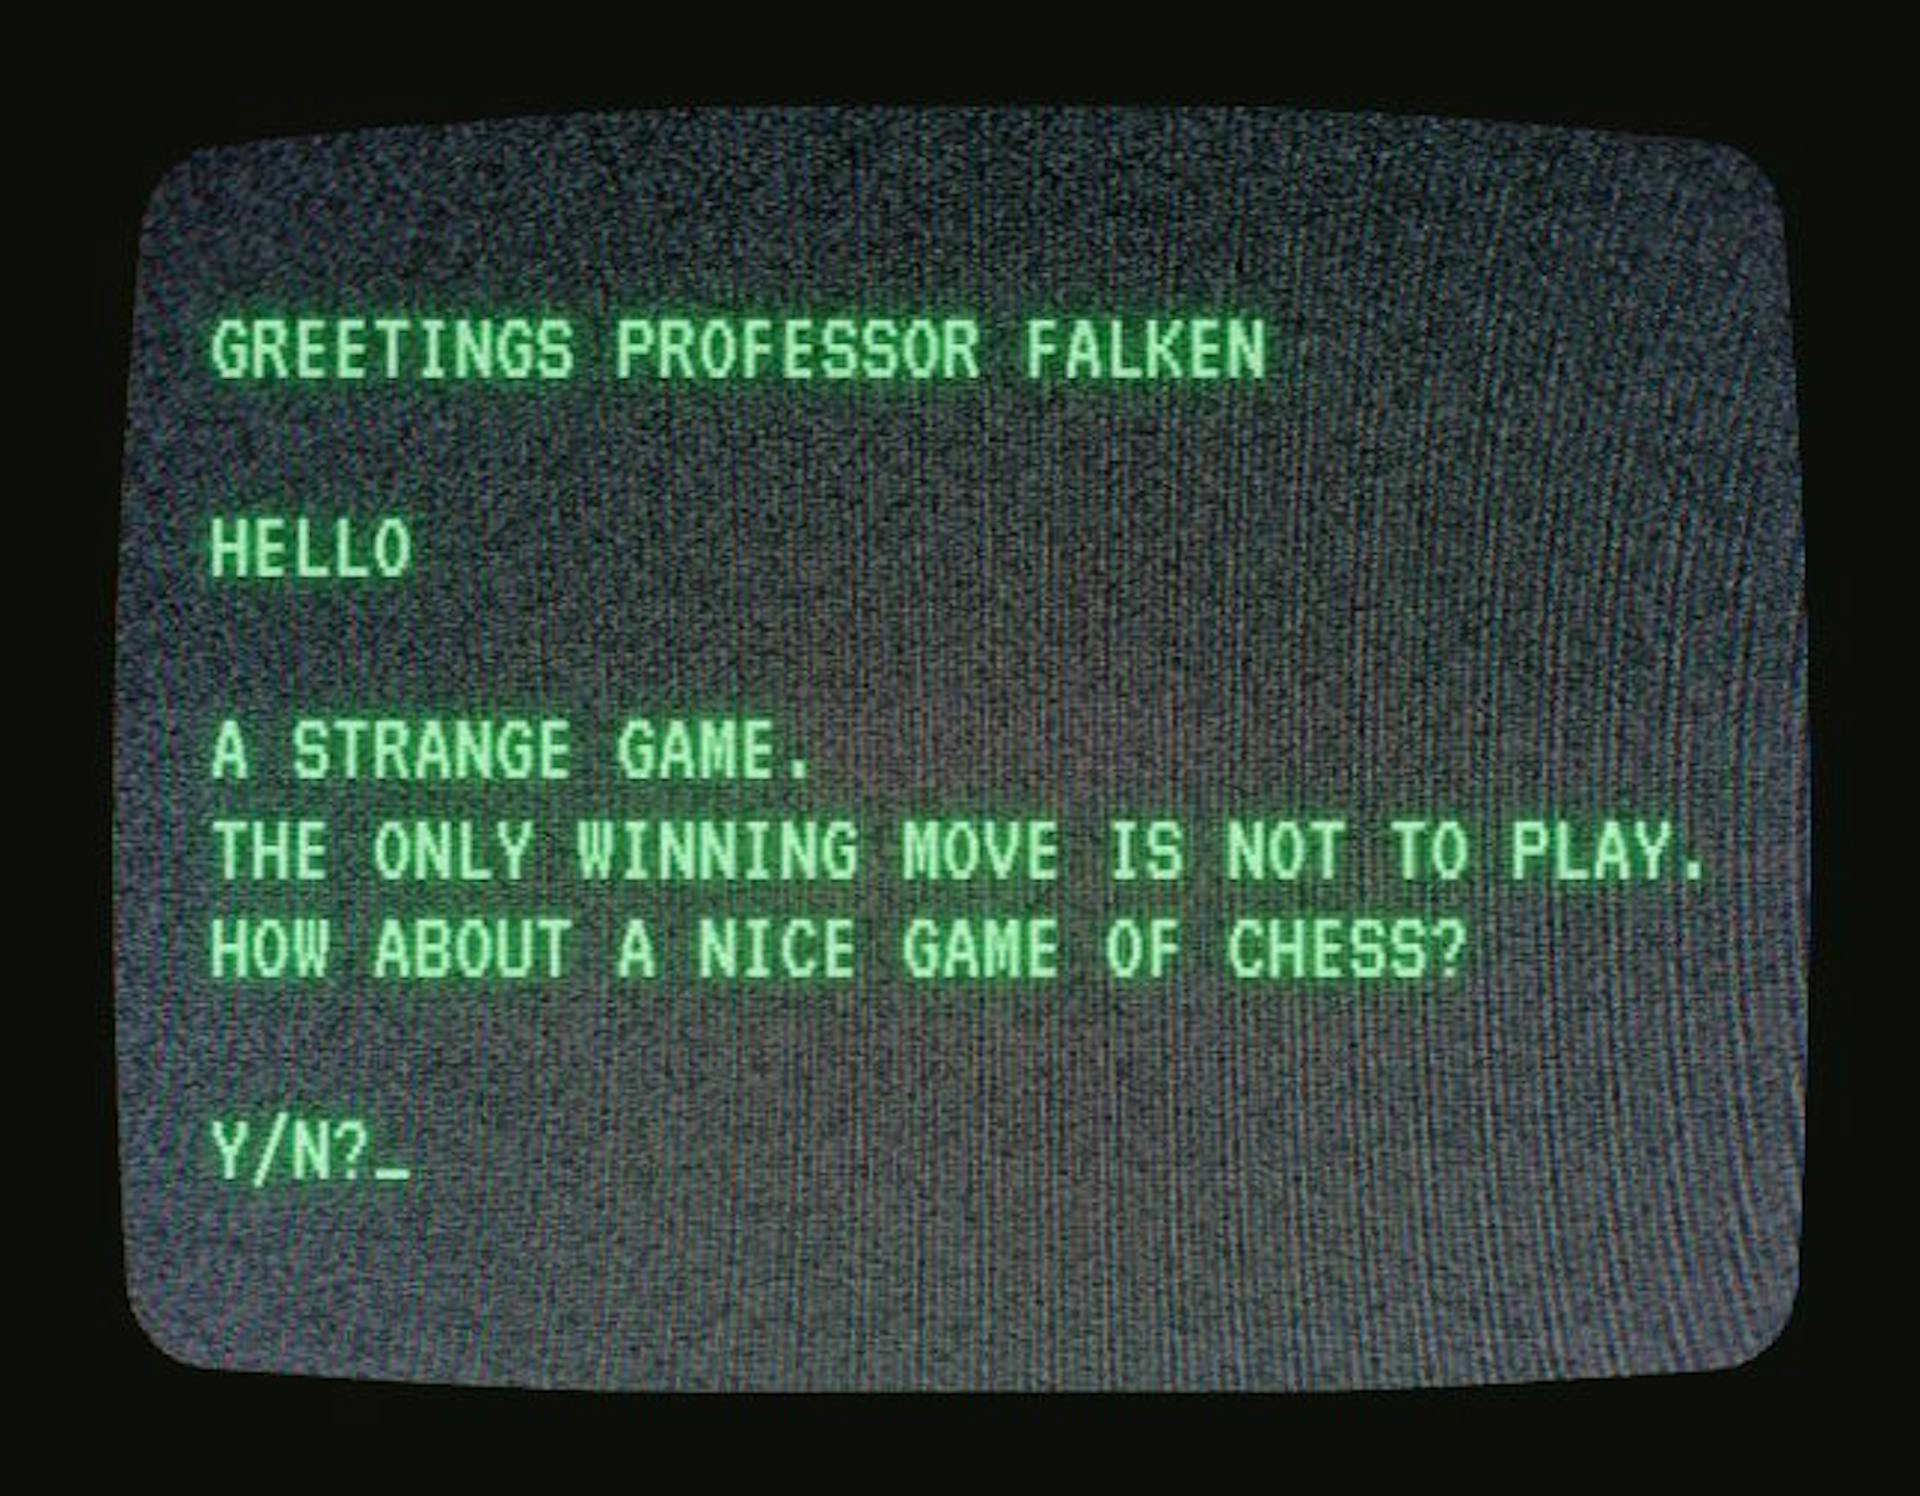 For those too young to know, you need to watch the 1983 film Wargames.